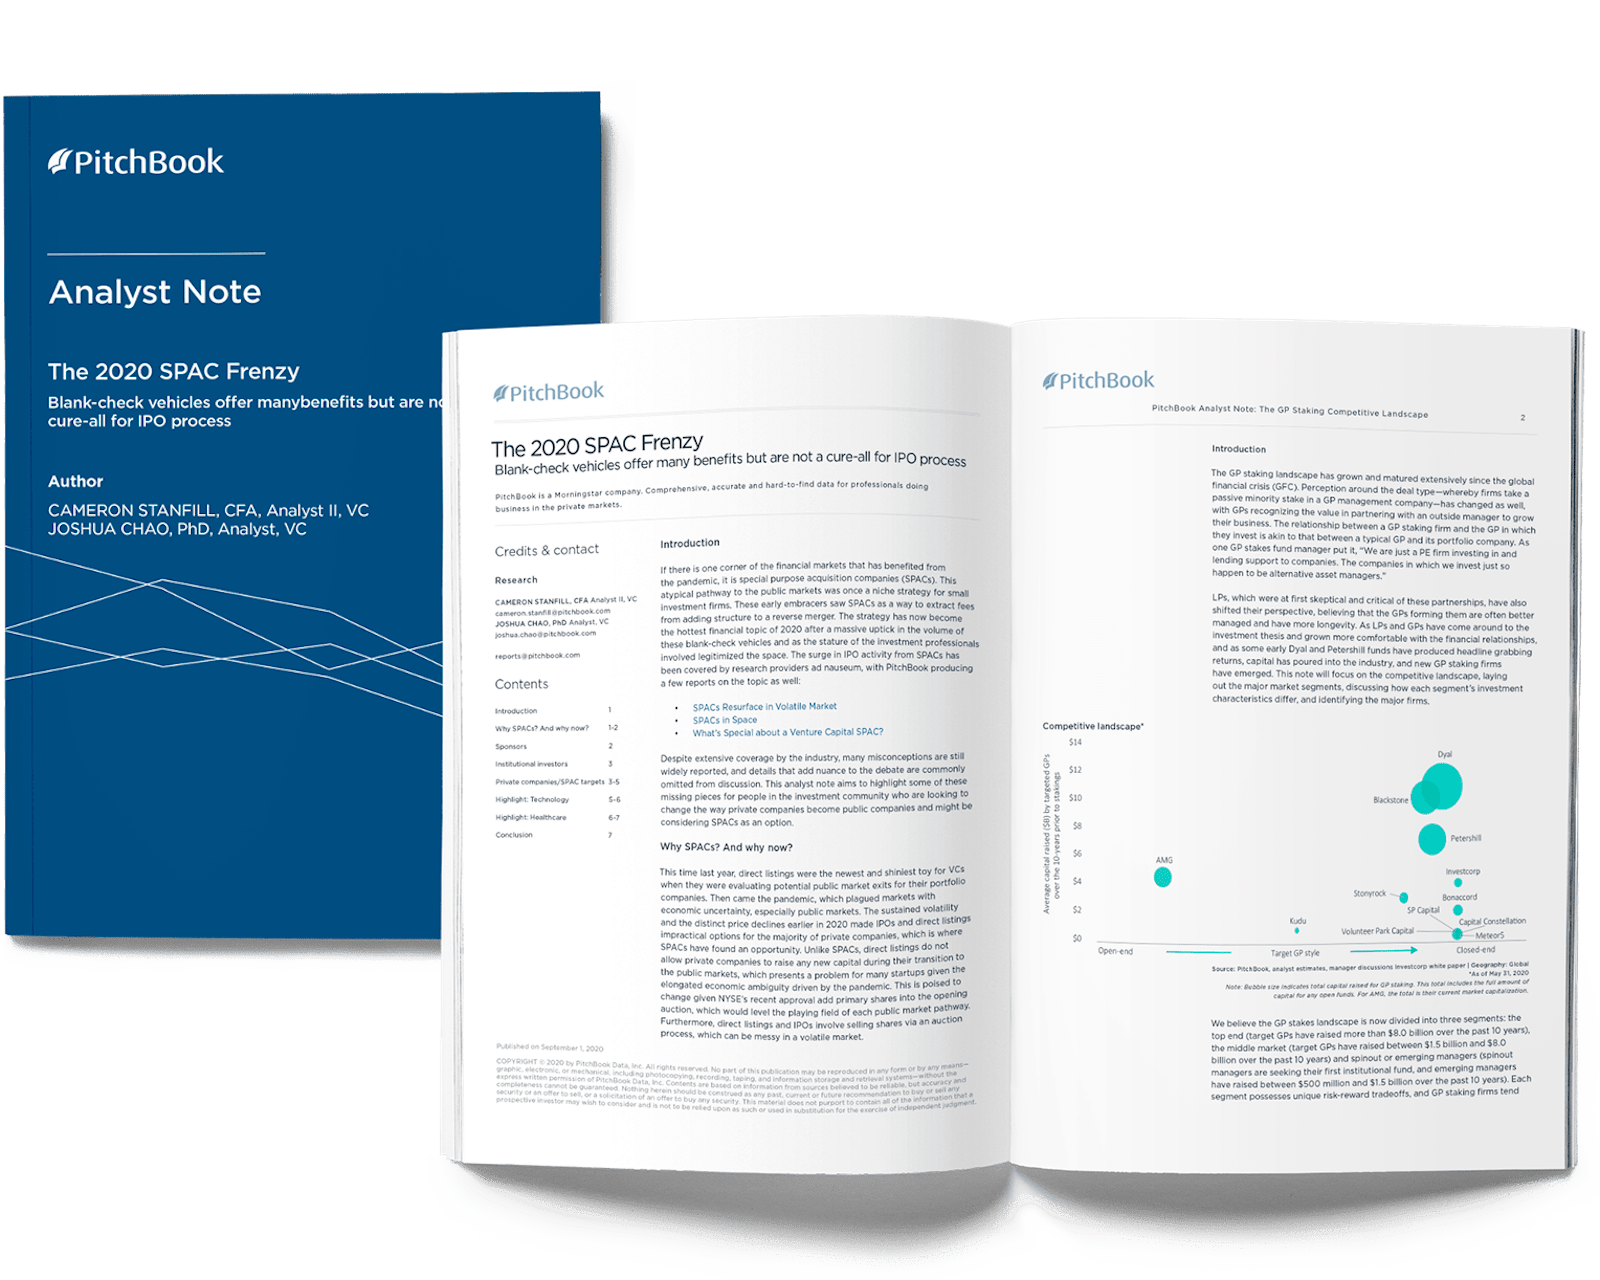 Cover and introduction excerpt from PitchBooks’s Analyst Note: The 2020 SPAC Frenzy.